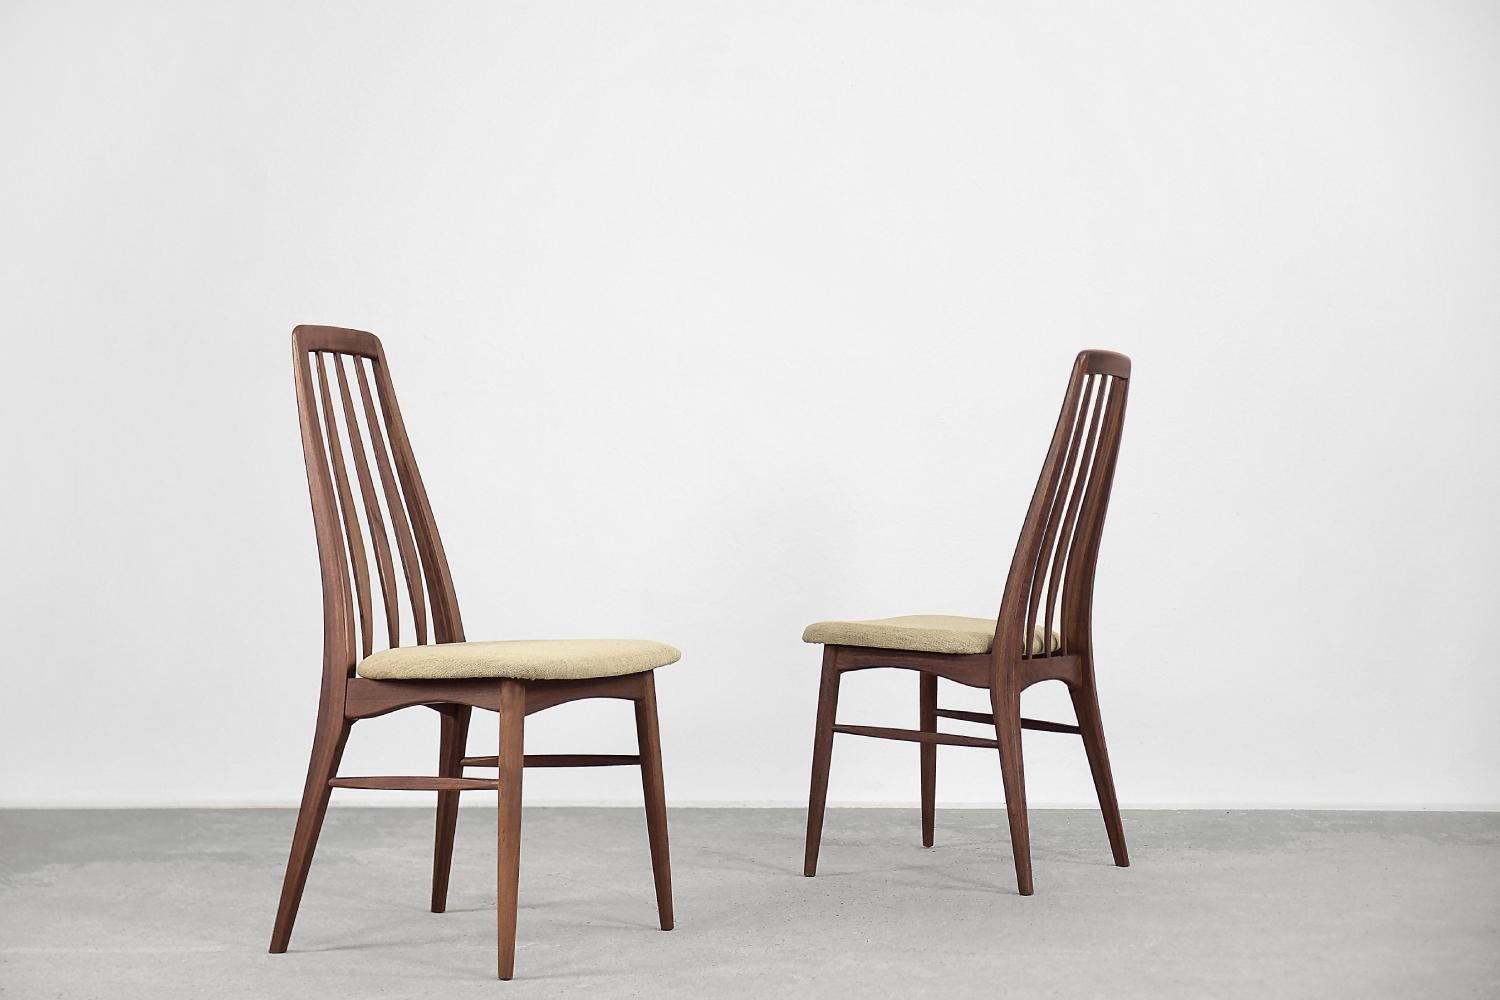 This set of two modernist Eva chairs was designed by Niels Koefoed for the Danish Koefoed Hornslet manufacture in 1964. This chairs are made of solid teak and upholstered in high-quality light fabric. This set has been designed as dining chairs, but